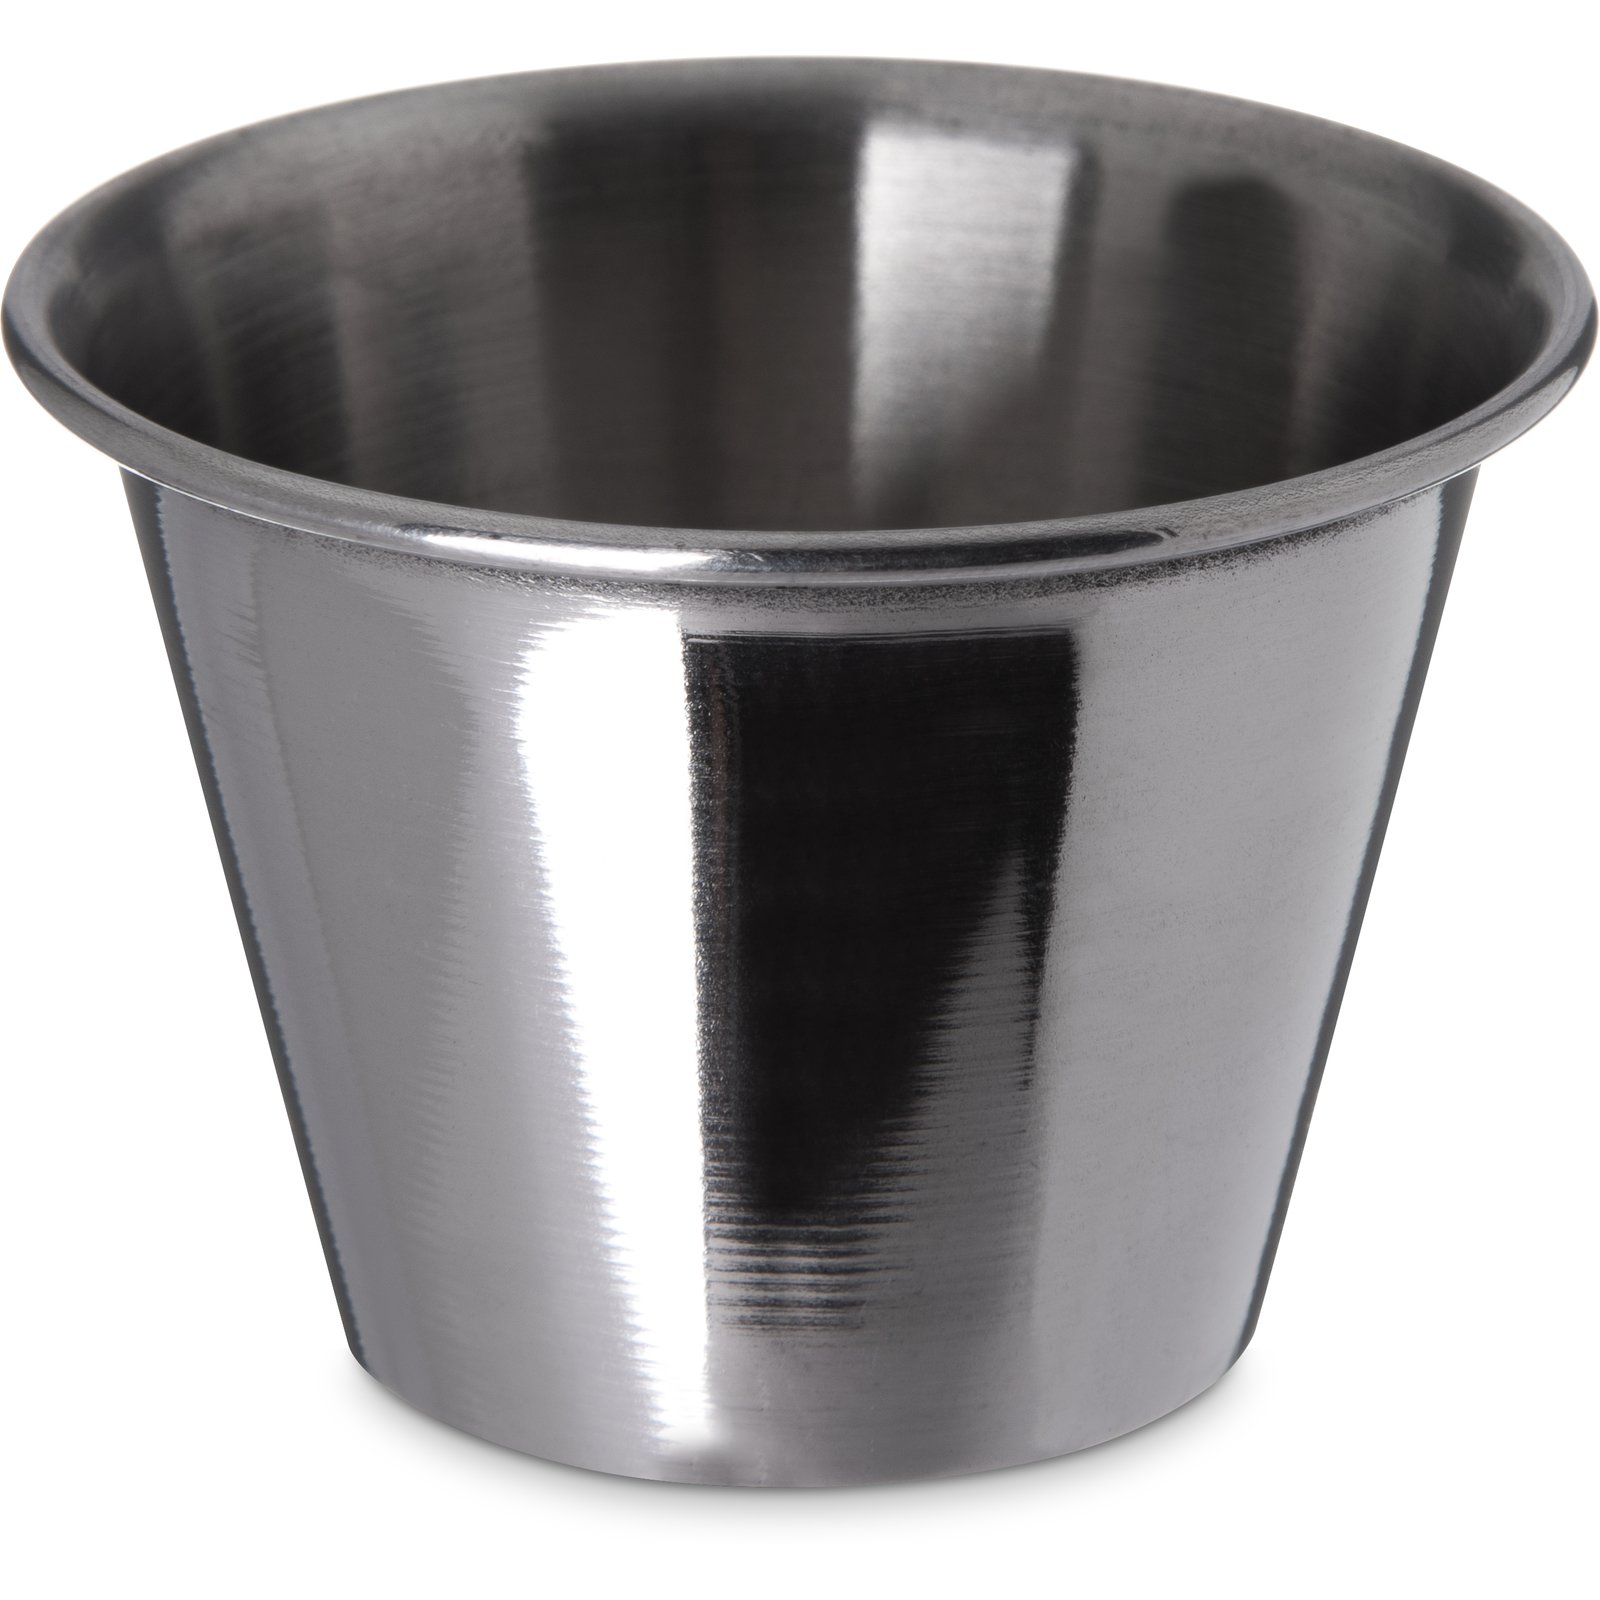 Do Stainless Steel Cups Rust?